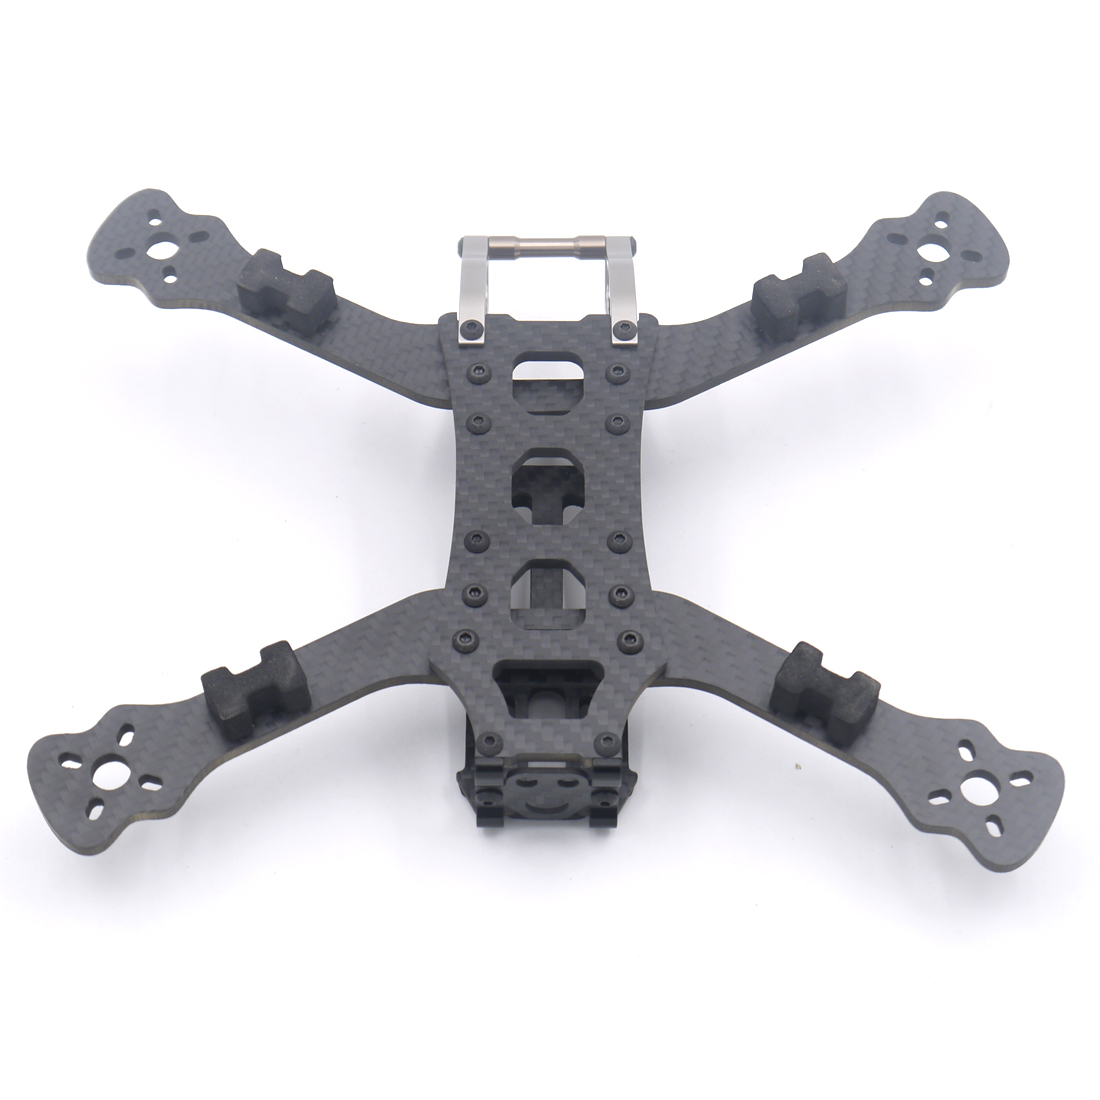 LEACO Umbrella 5 Inch 230mm FPV Racing Frame Kit 4mm Arm Carbon Fiber For RC Drone - Photo: 8